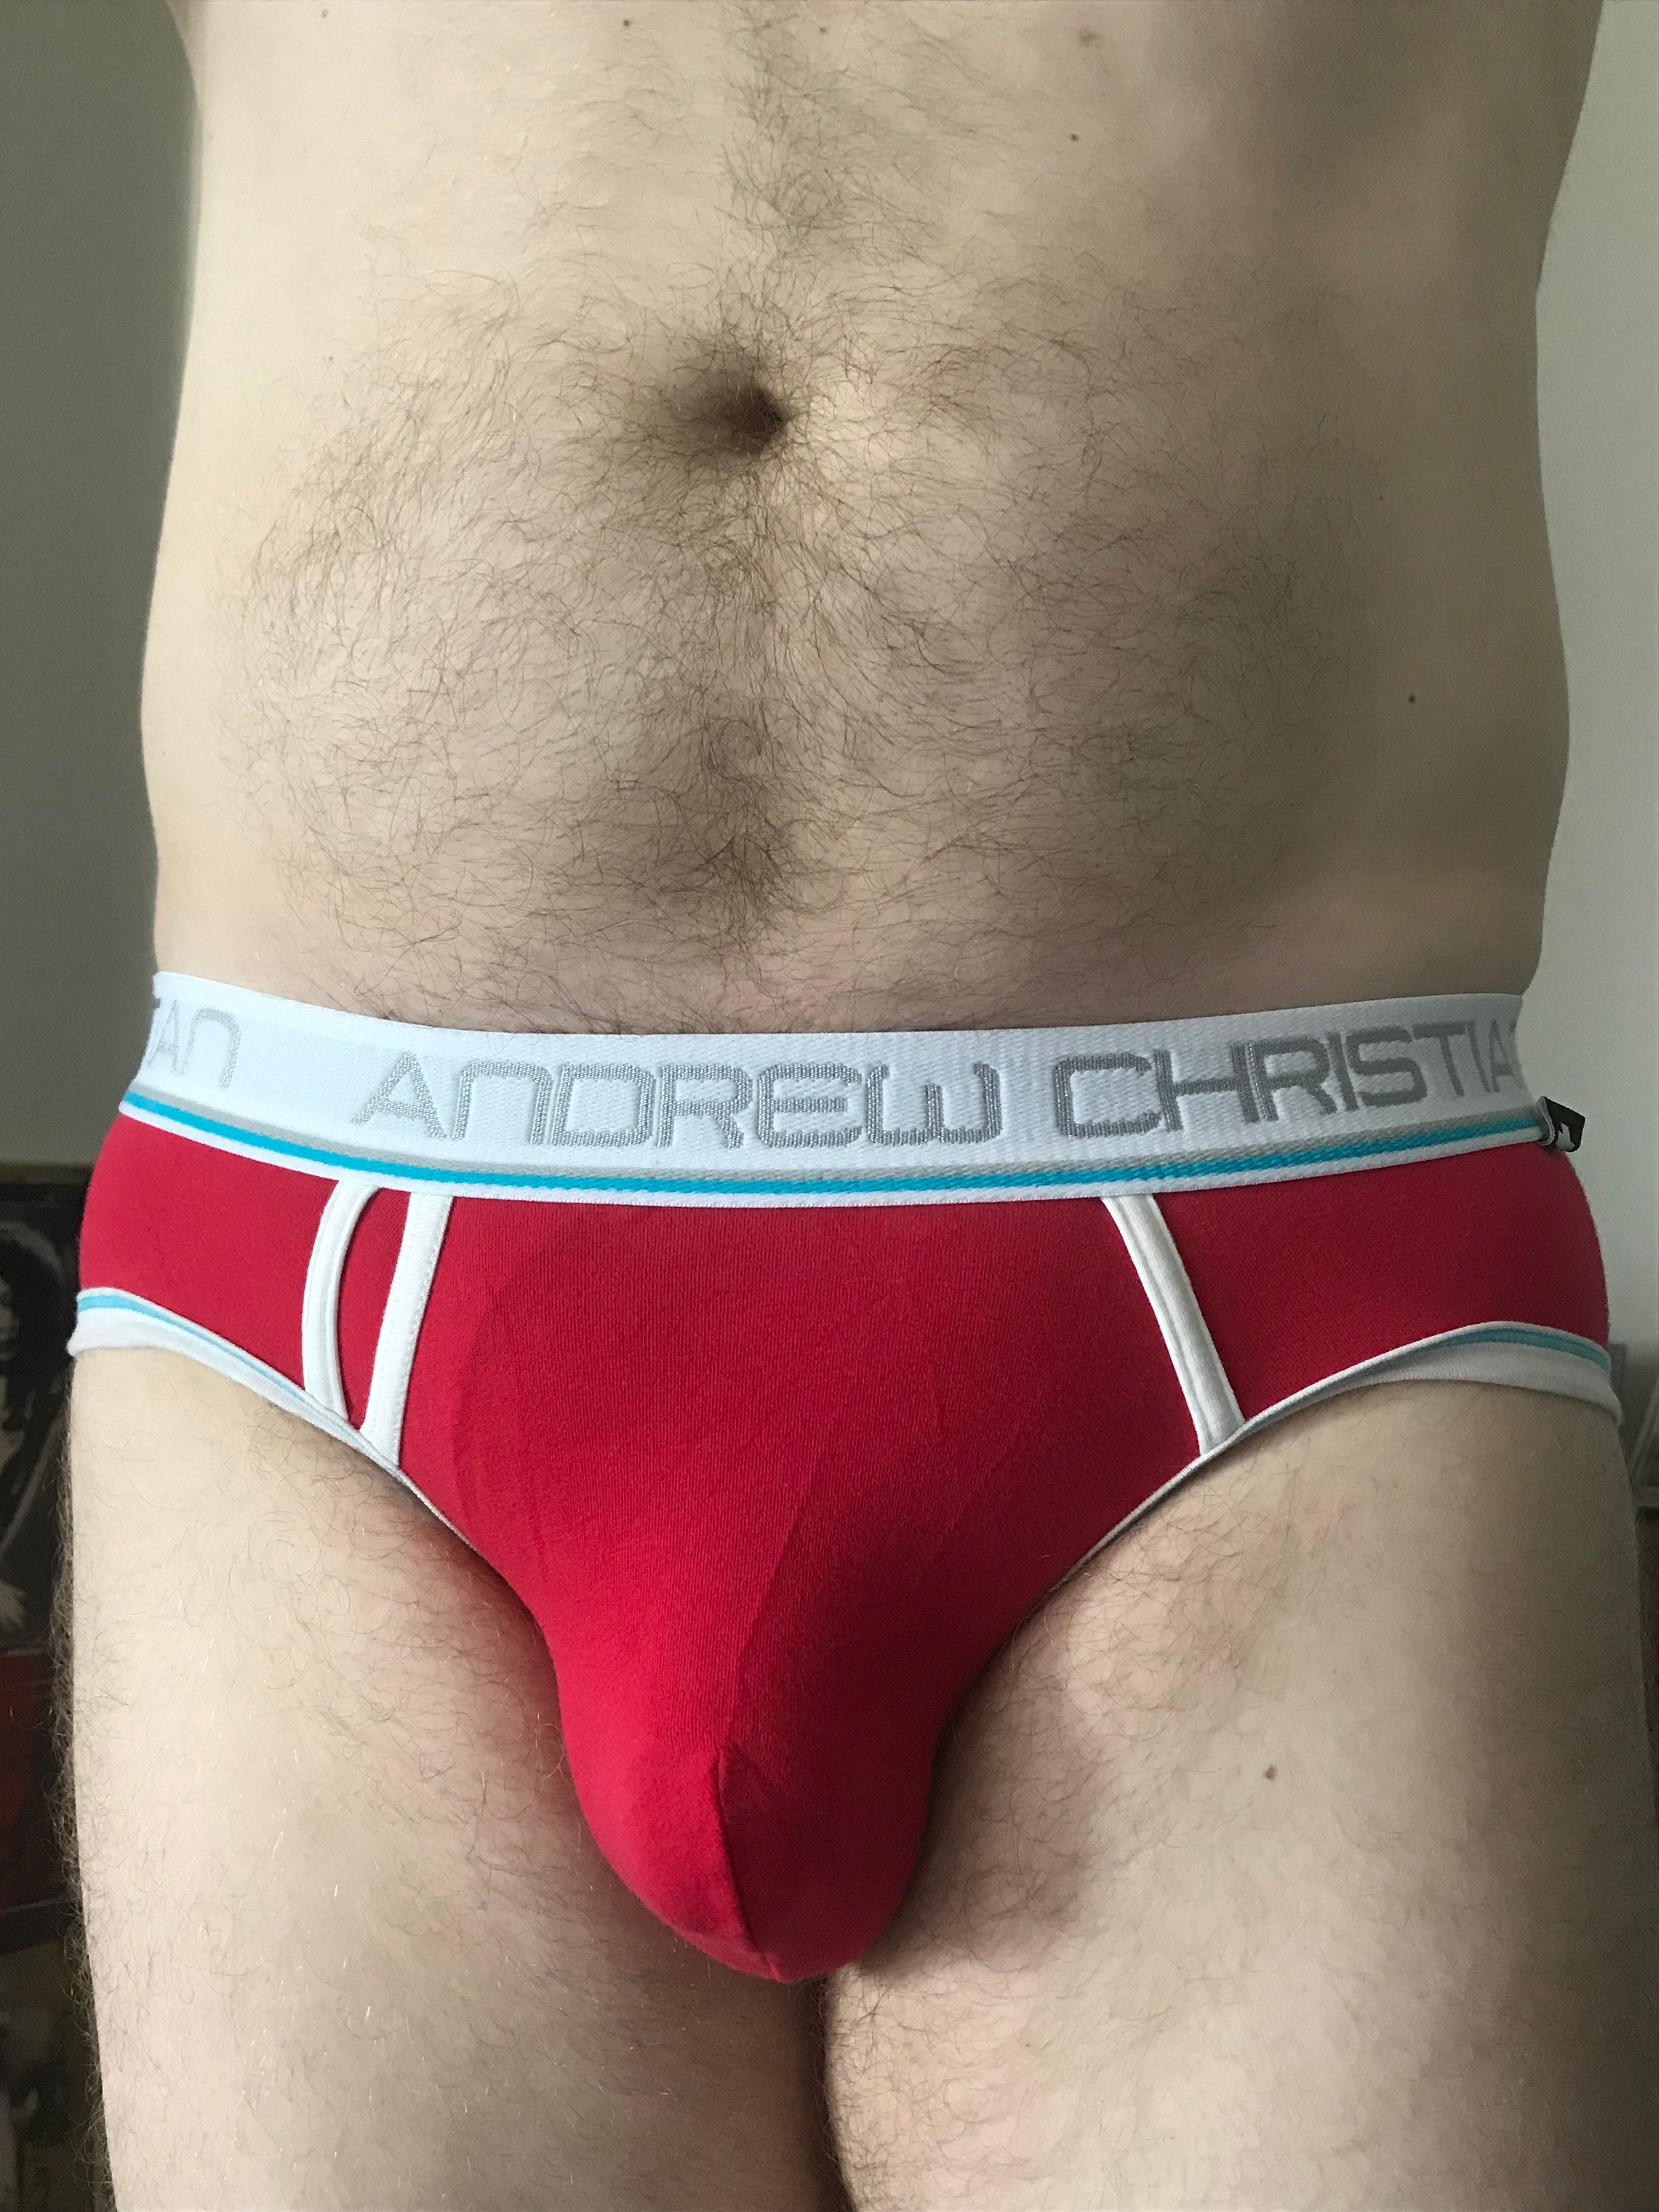 Festive underwear in your collection for the holidays?